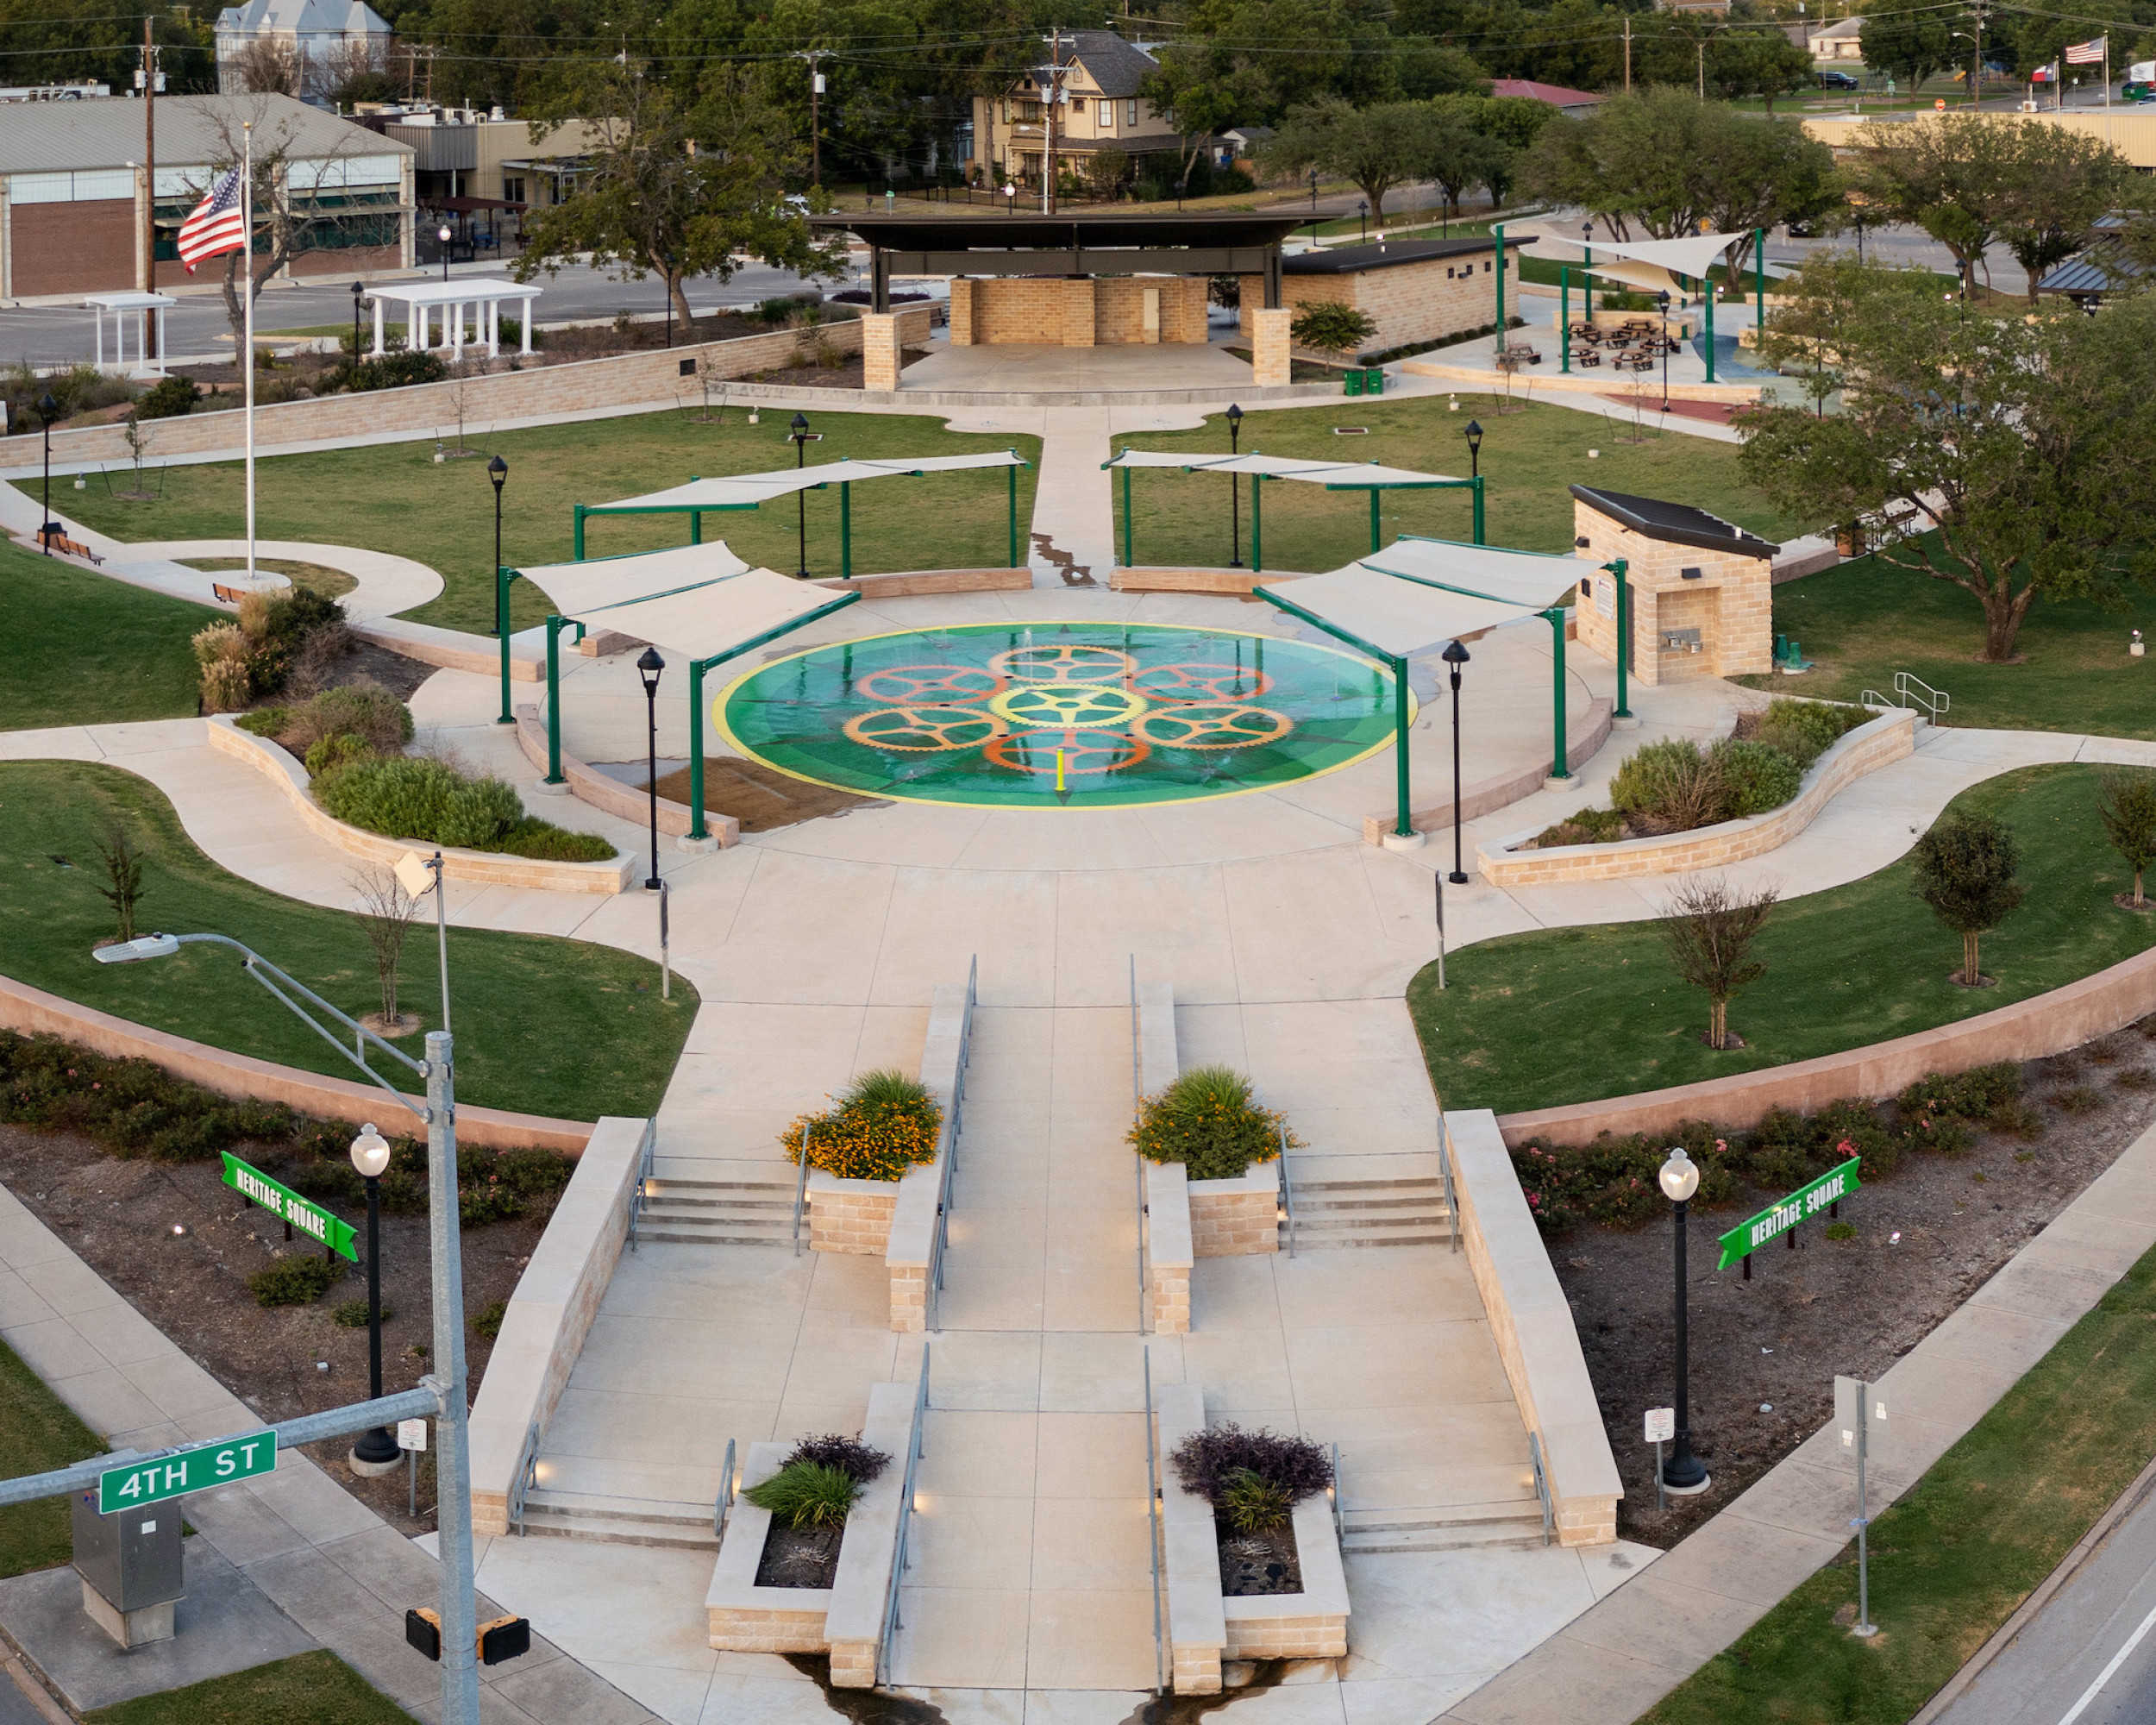 Aerial view of the Heritage Plaza